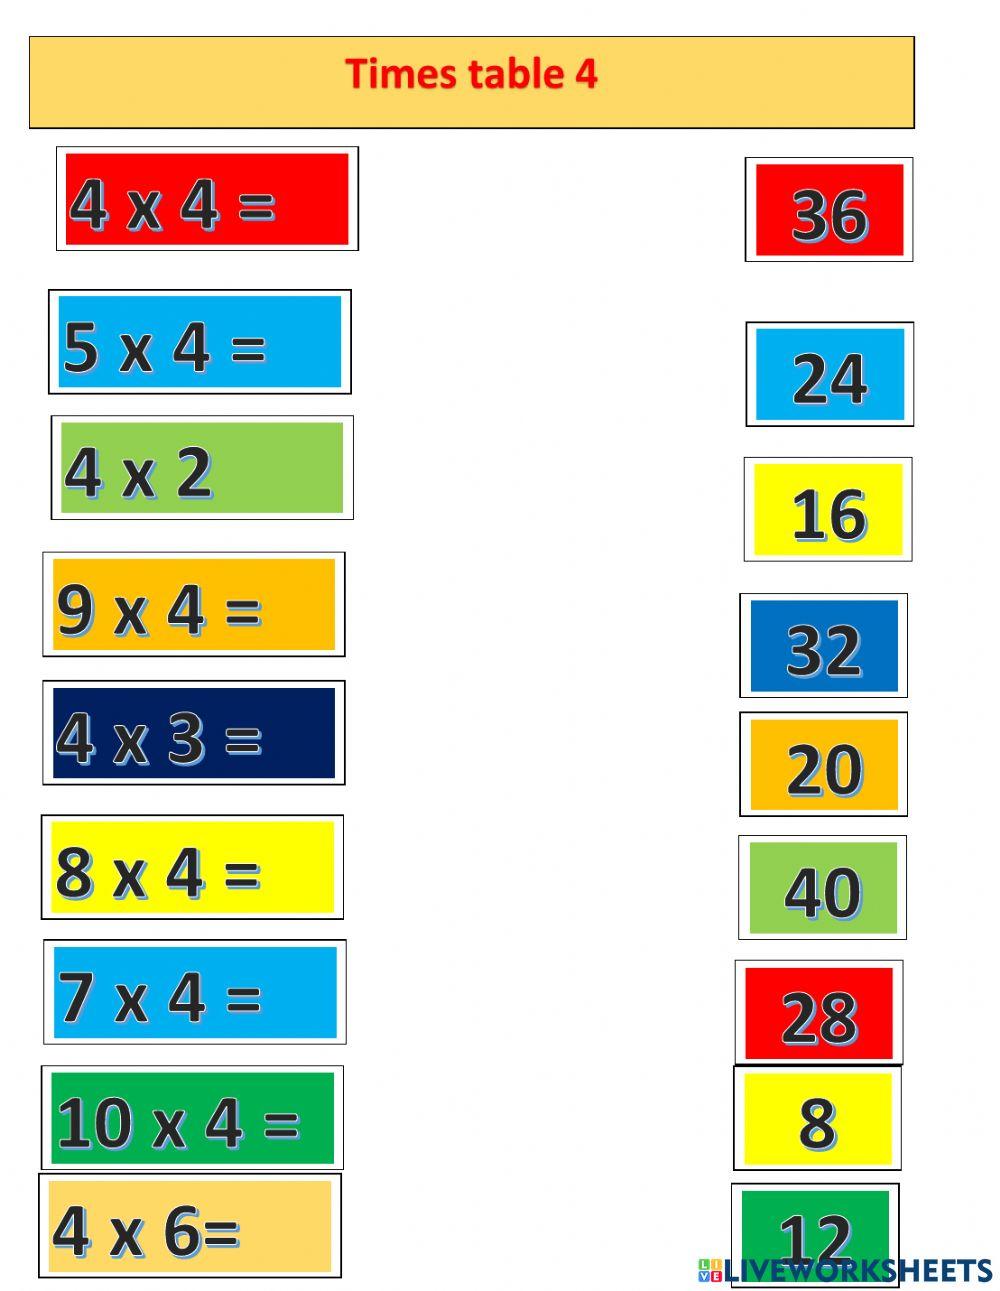 Times table 4